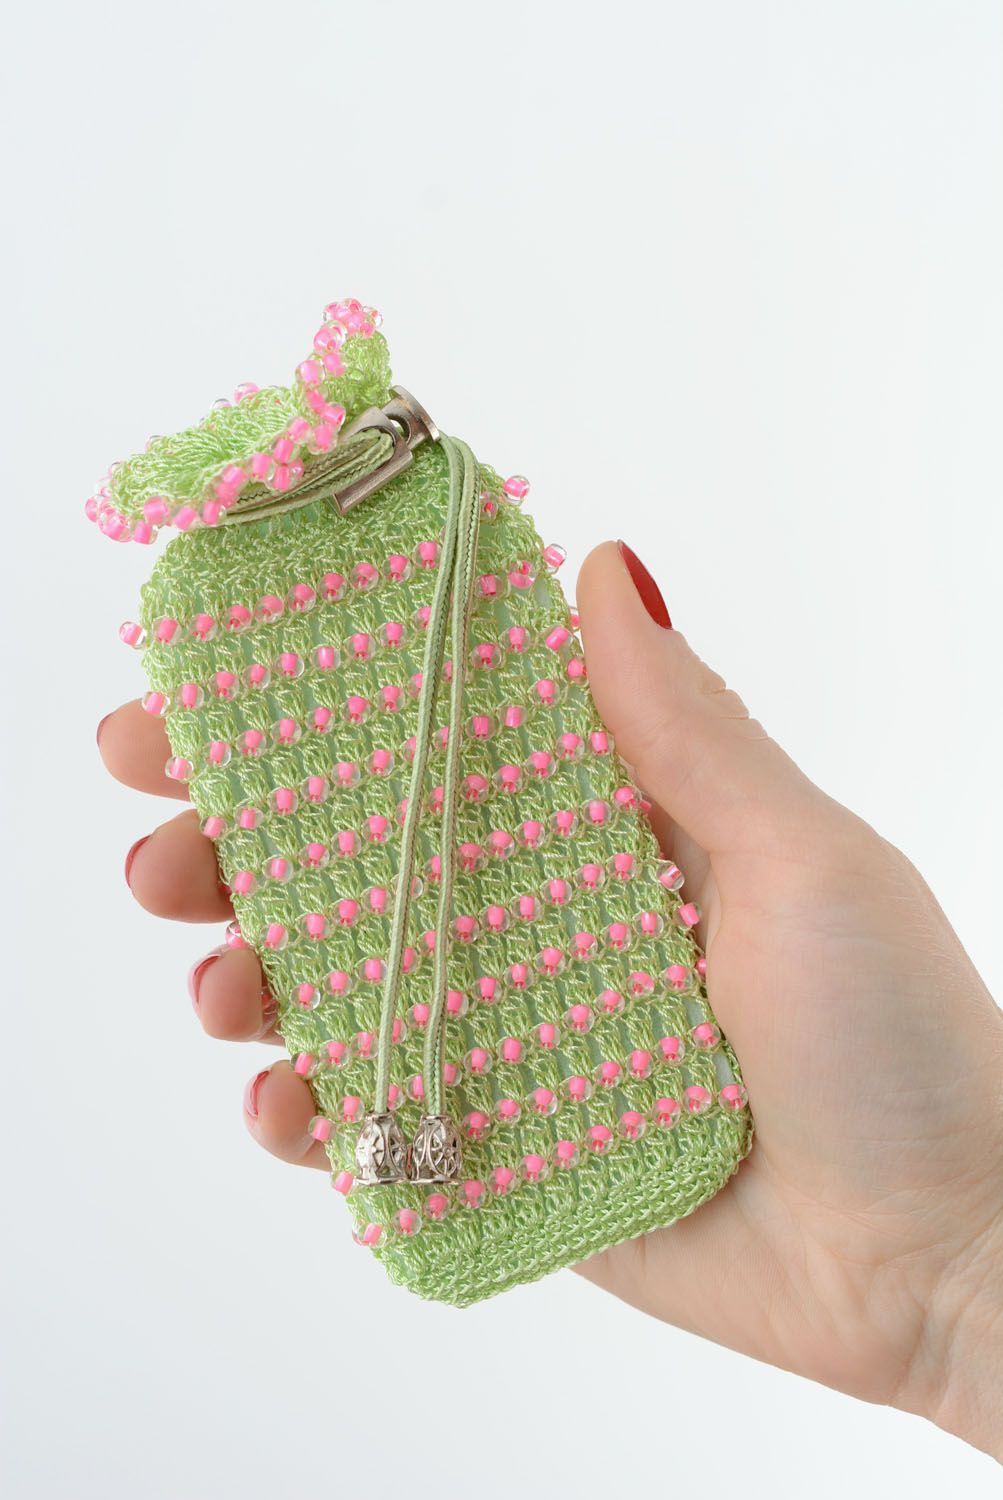 Crochet smartphone case Green and Pink photo 4